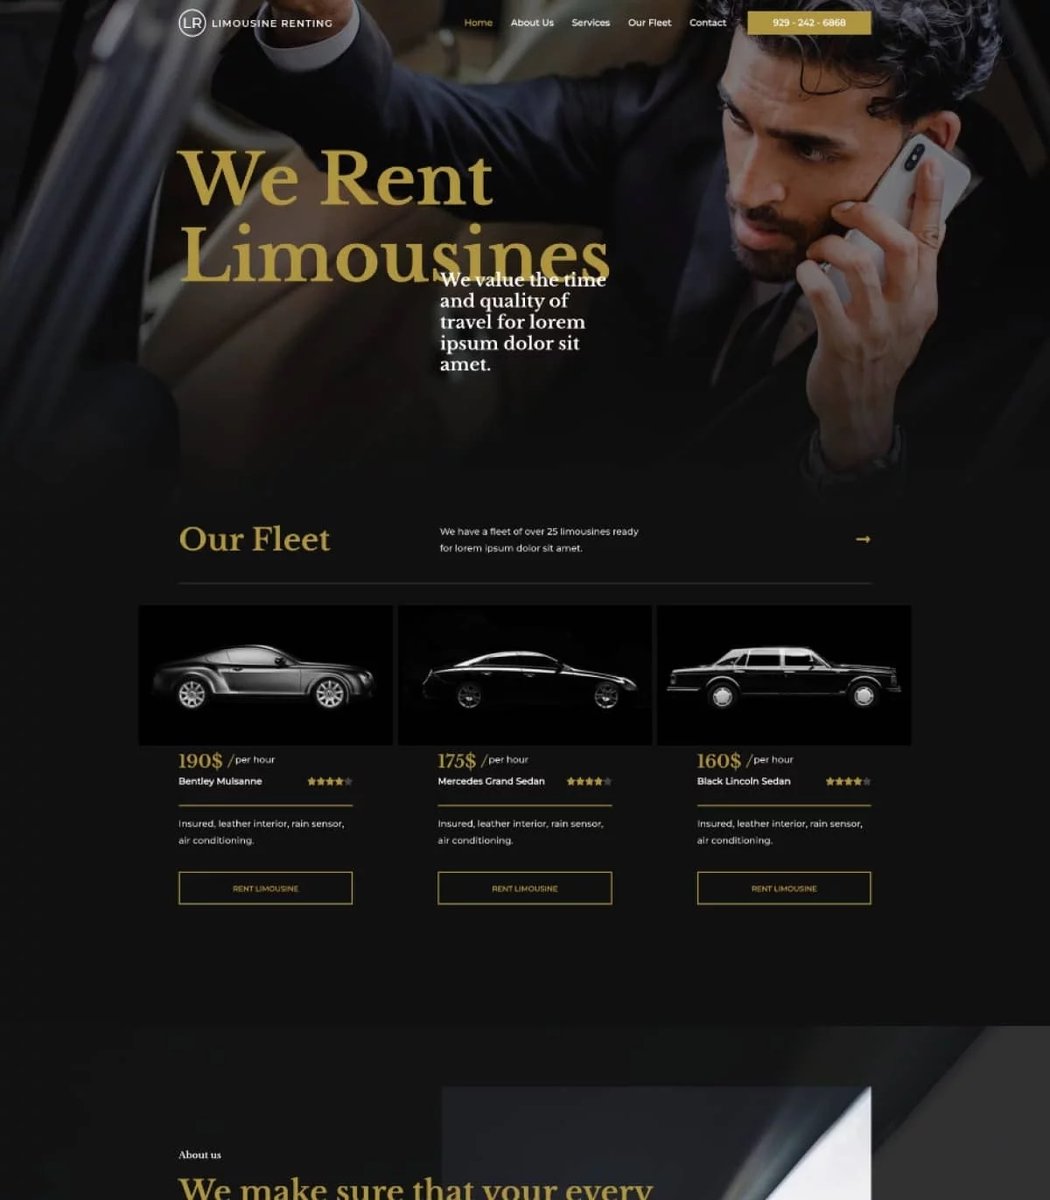 Complete limo hire website
Get more limo bookings with this complete website. Customizable to your needs & fully managed
#limohire #SmallBusiness #limobusiness #websites #businesswebsite